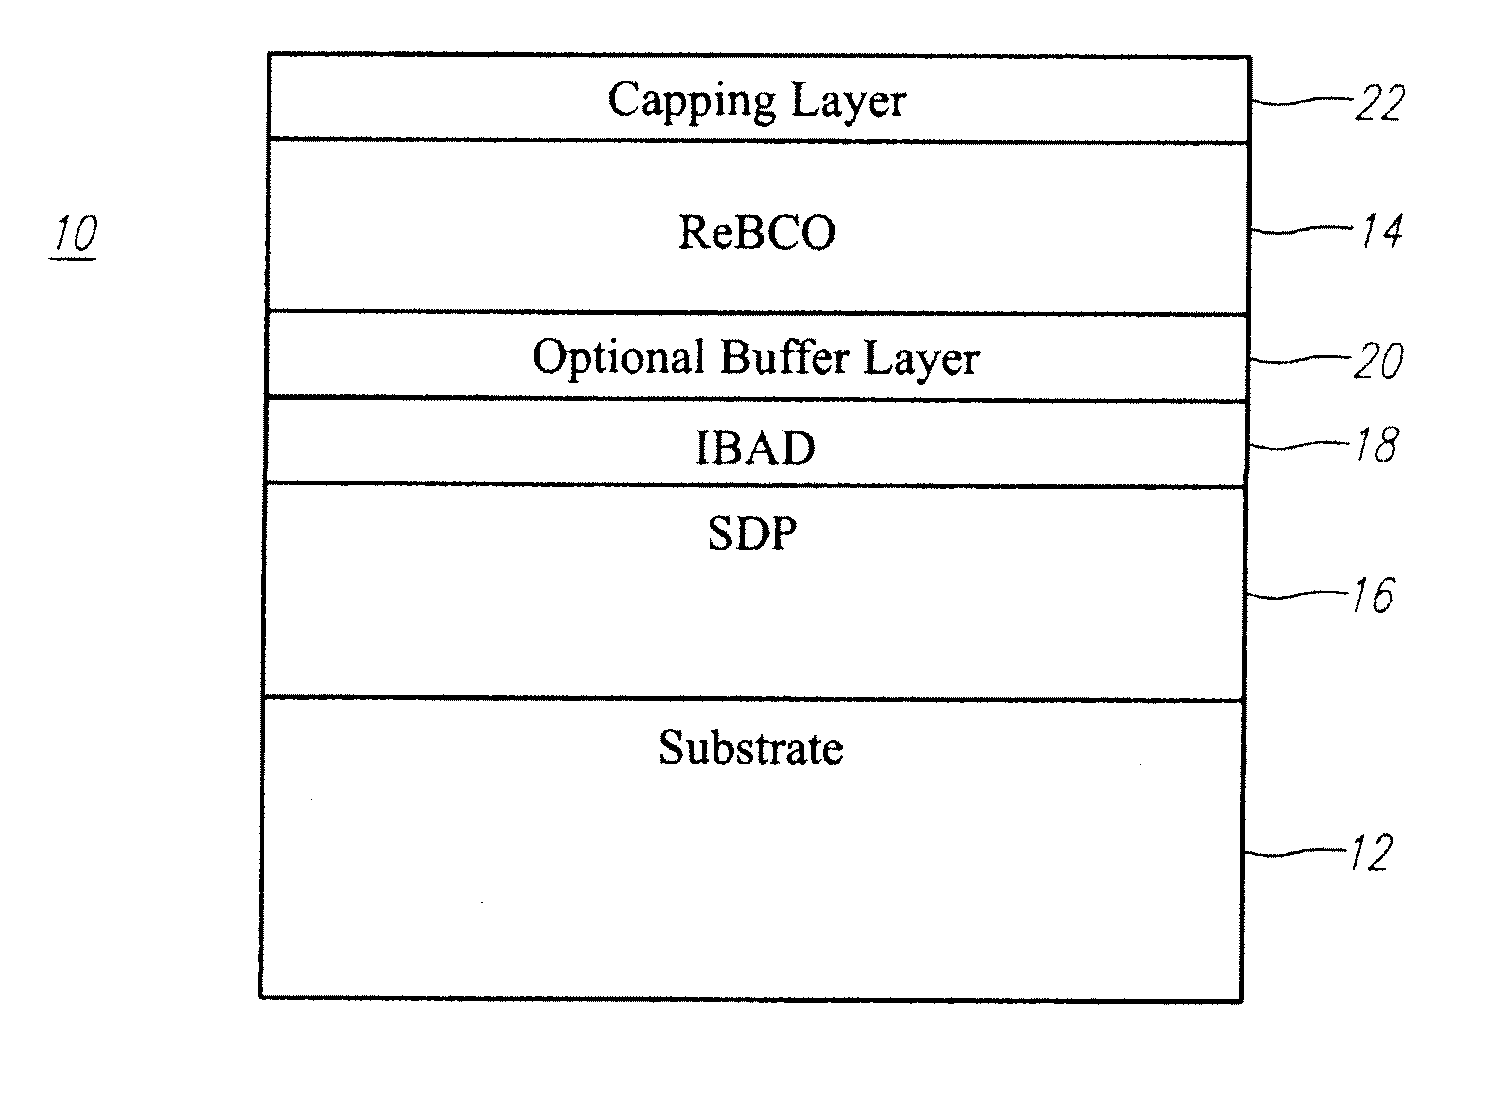 Coated conductor high temperature superconductor carrying high critical current under magnetic field by intrinsic pinning centers, and methods of manufacture of same